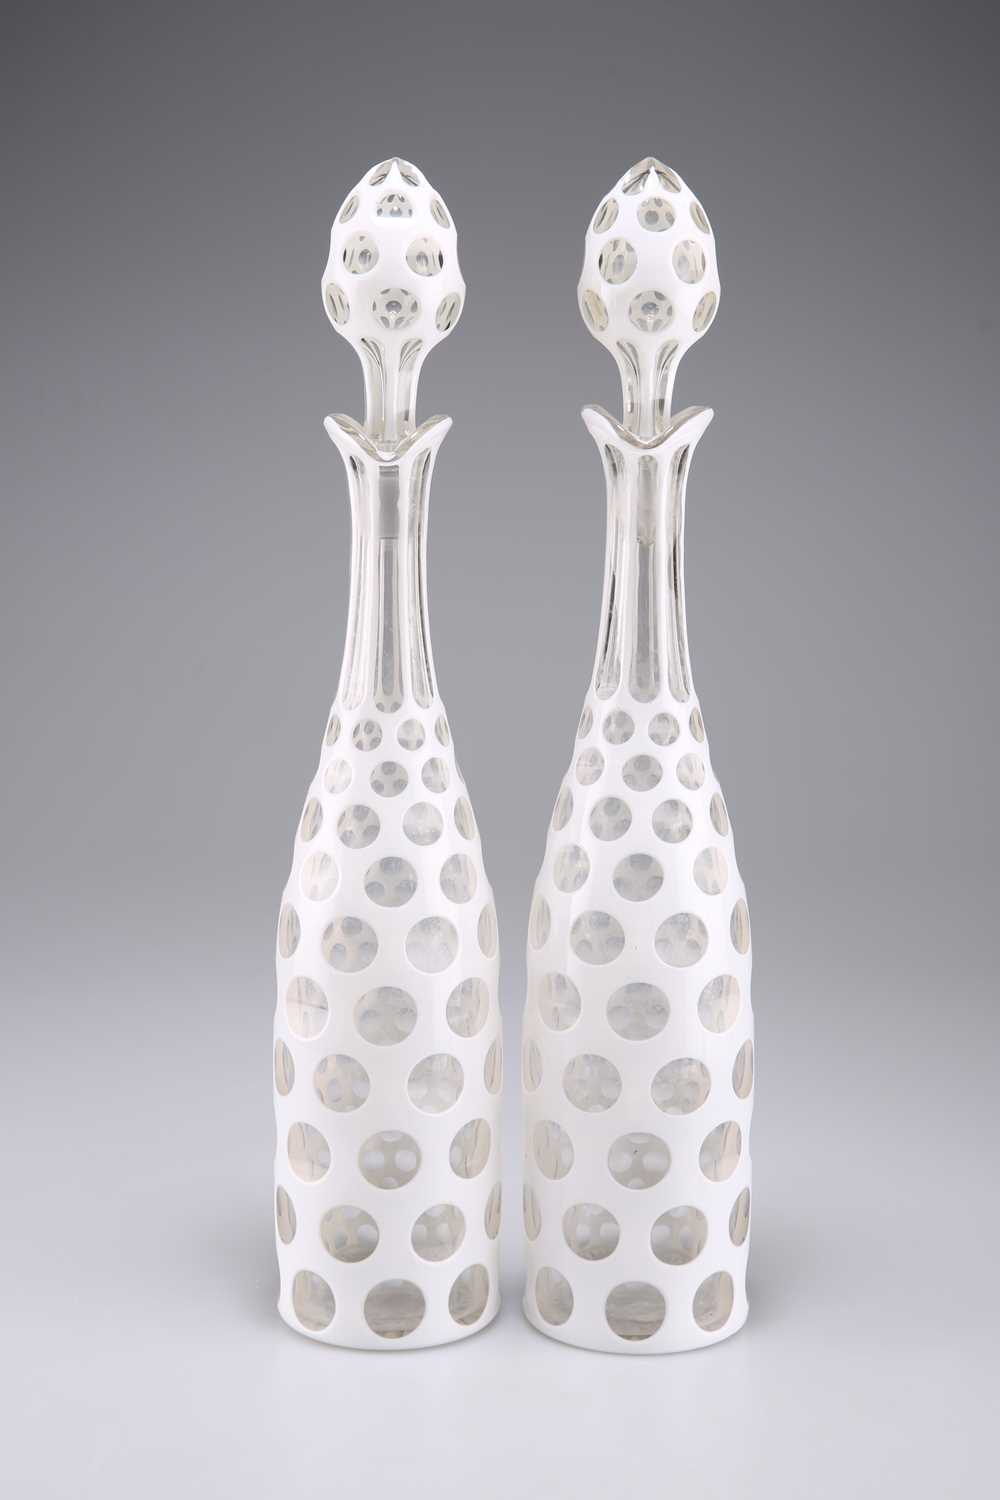 A PAIR OF 19TH CENTURY BOHEMIAN OVERLAY GLASS DECANTERS - Image 2 of 2